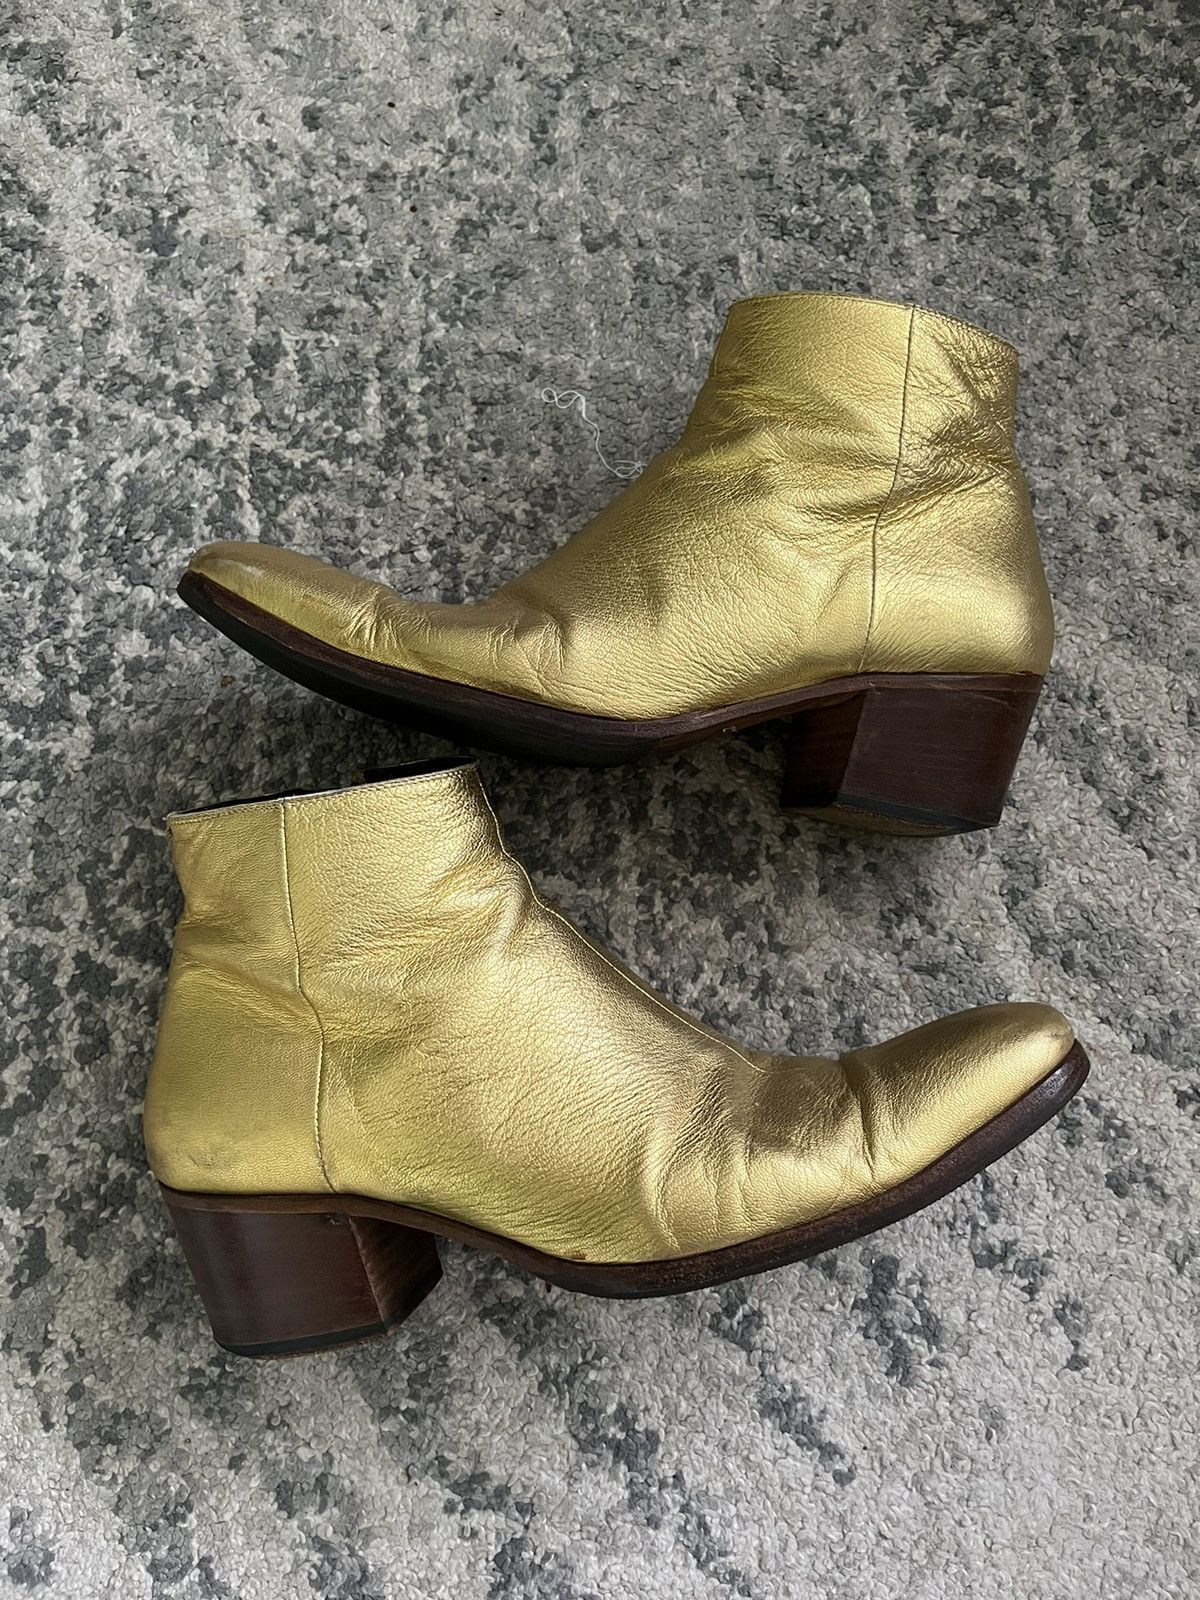 Pre-owned Dior X Hedi Slimane Dior Homme Aw05 Gold Cuban Heel Shoes Boots